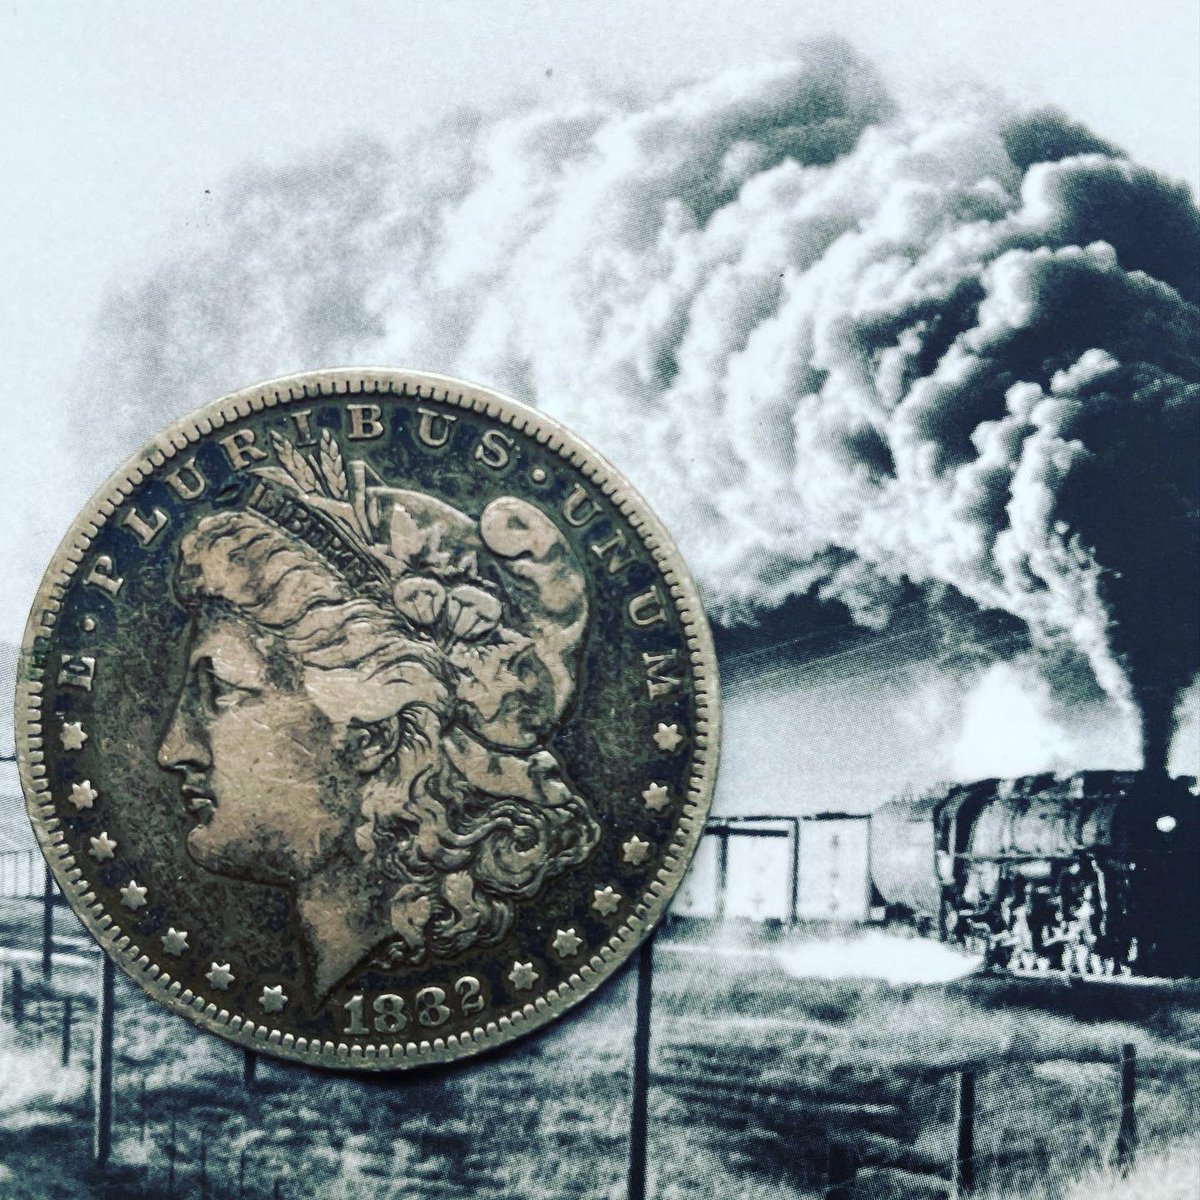 When my great grandmother turned 100 in 1982, at her birthday party she gave all of her great grandchildren an 1882 silver dollar. The coin, which has been on my desk ever since, inspired Billy’s collection in THE LINCOLN HIGHWAY.